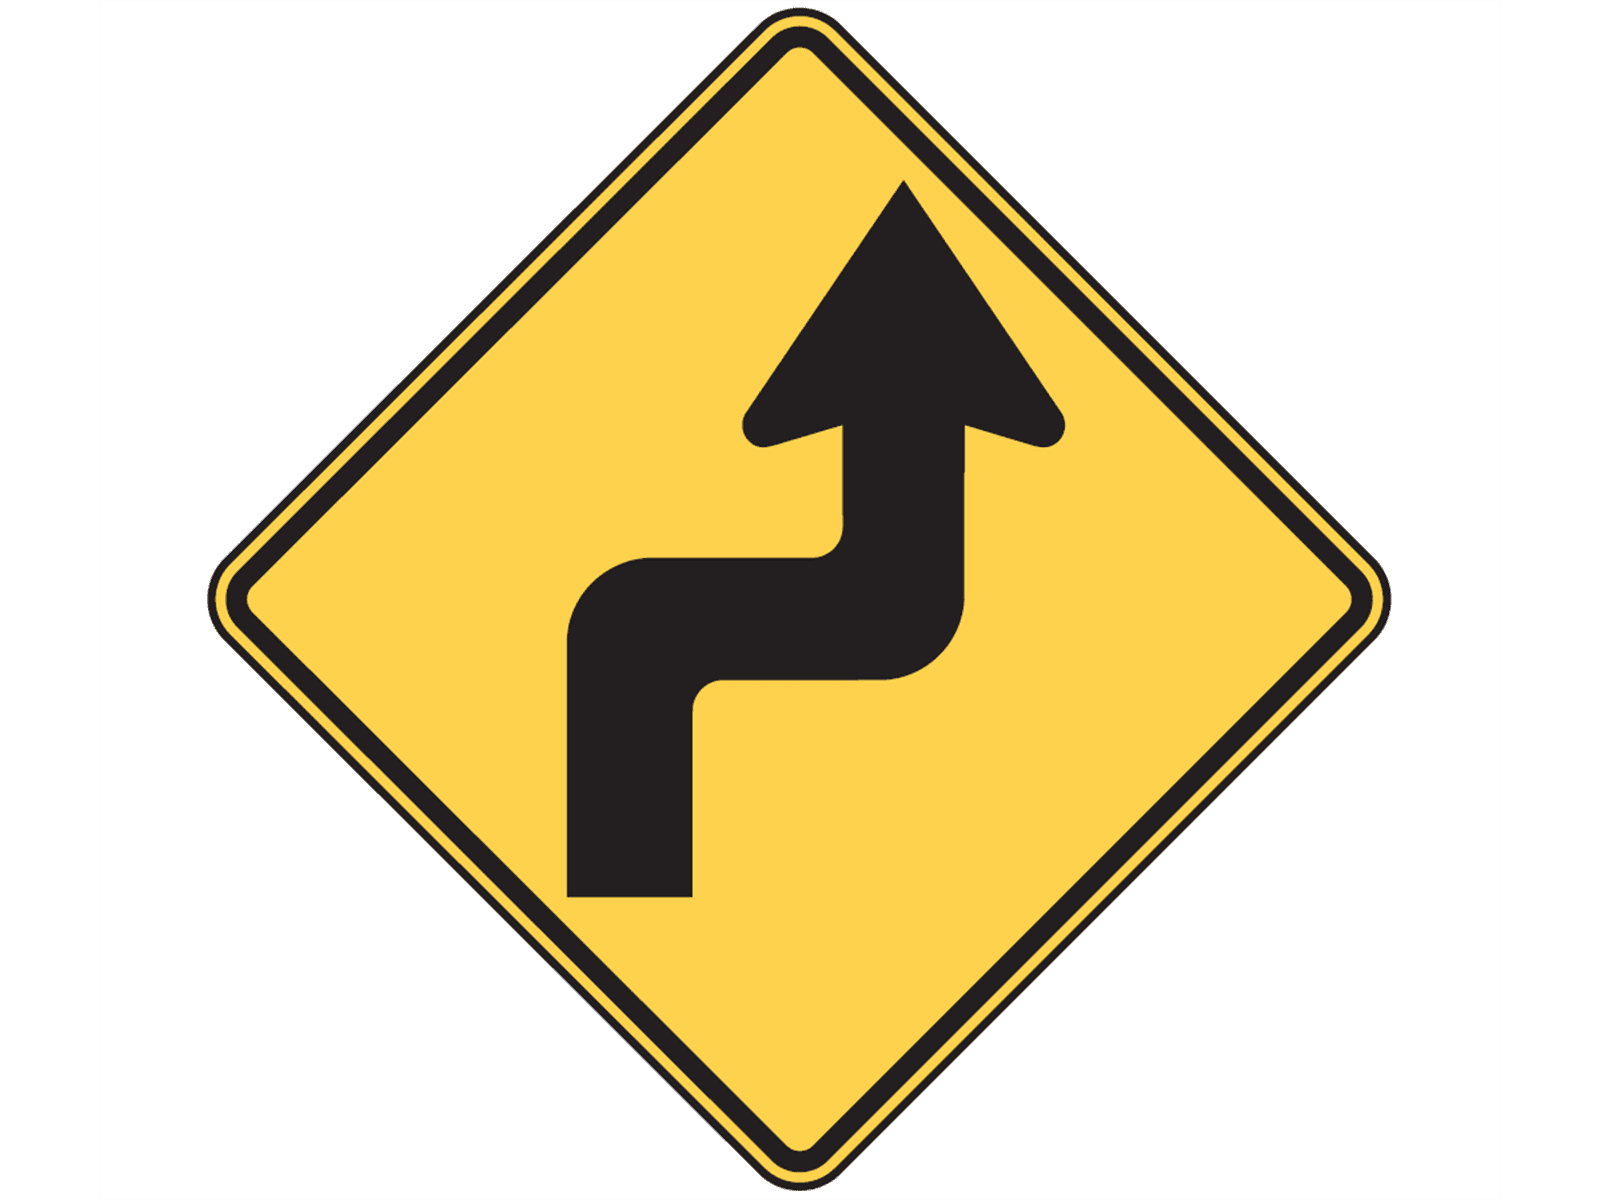 Right and Left Turns Coming W1-3R - W1: Curves and Turns